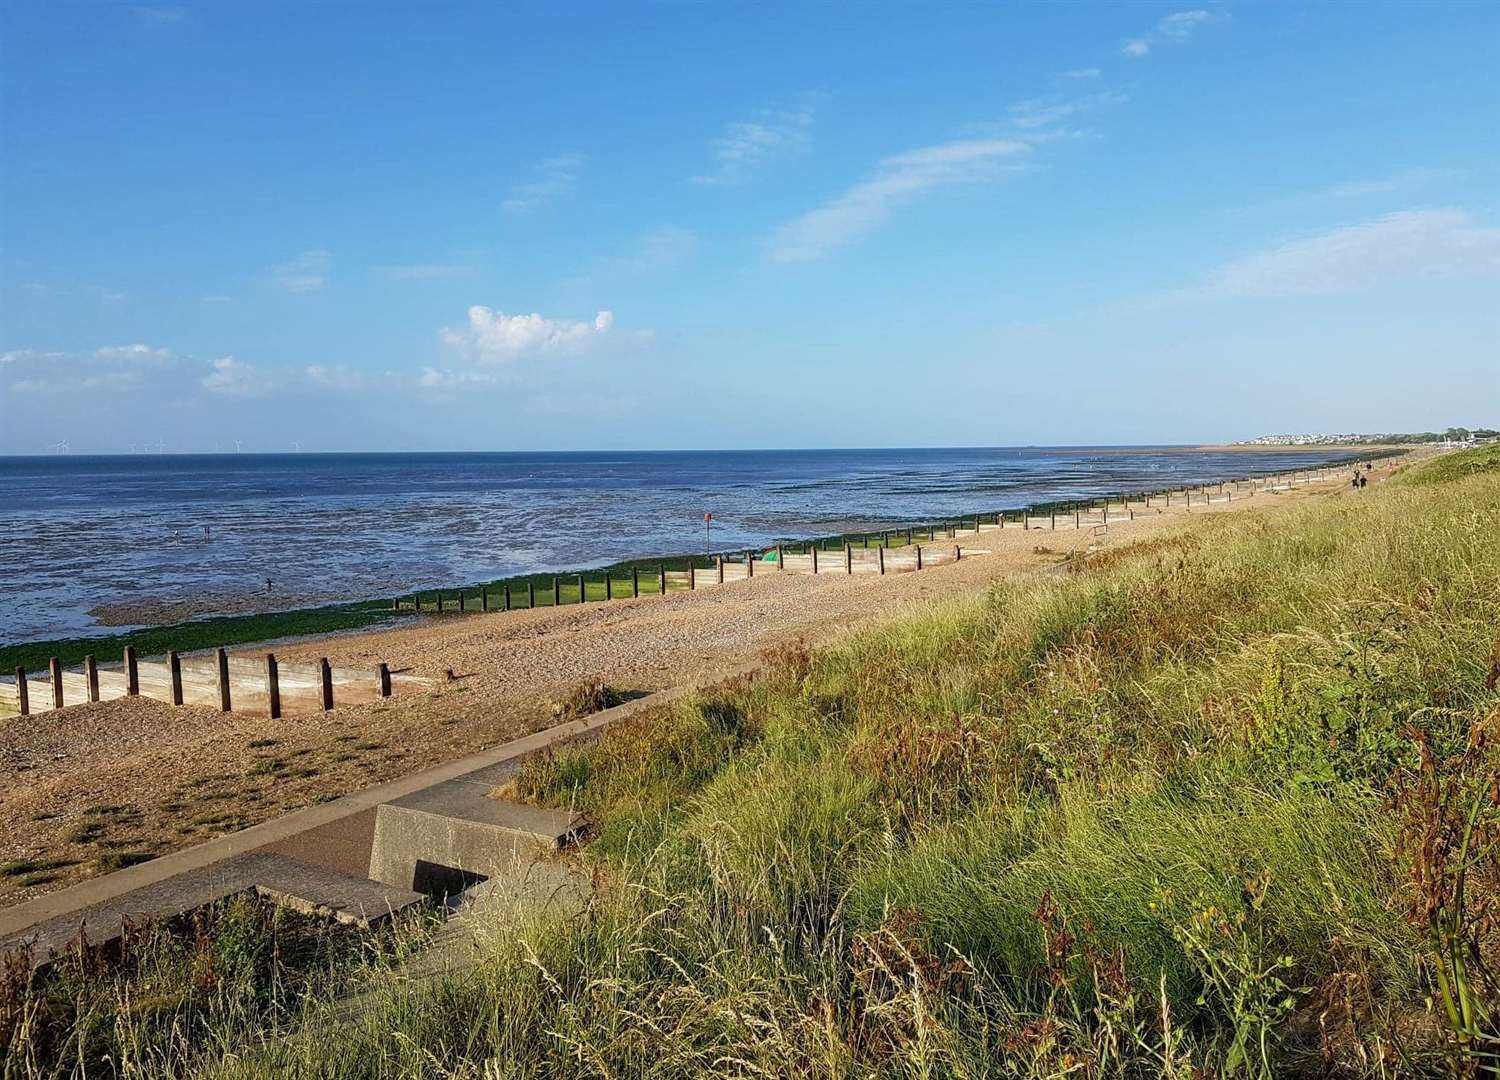 Tankerton Beach, Whitstable, where the seal was found